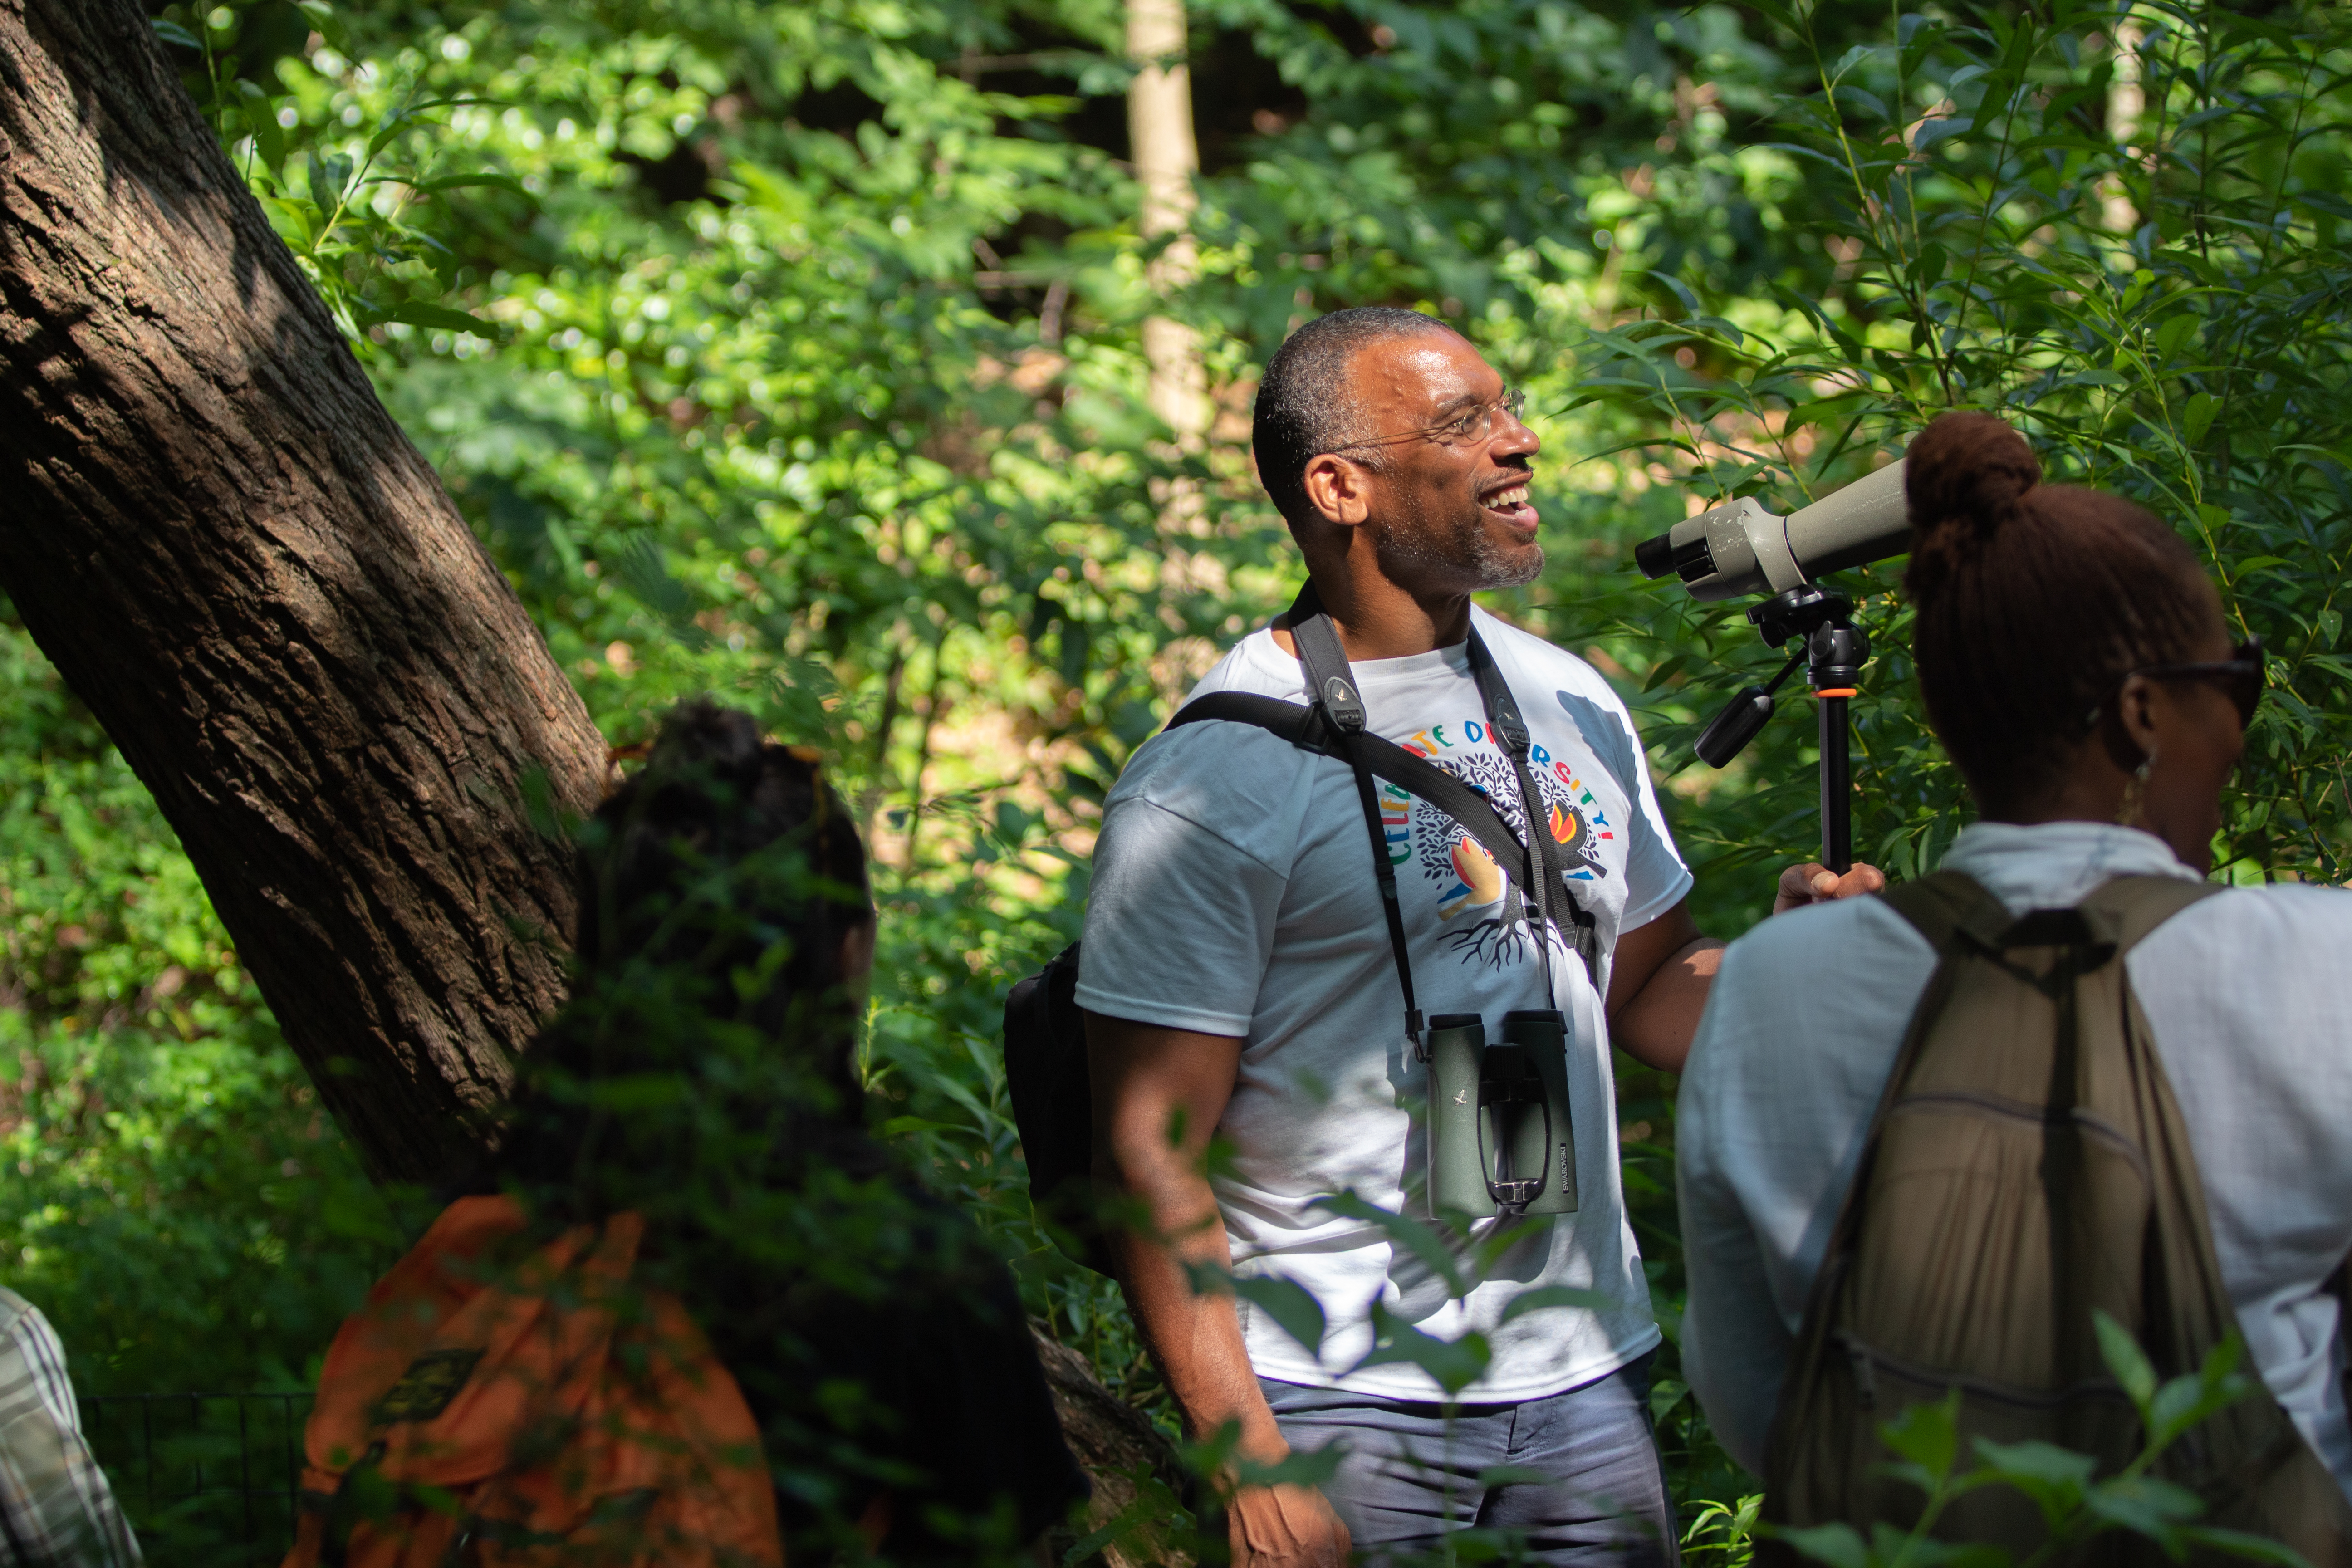 NYC Audubon board member Christian Cooper leads fourth and fifth graders from AmPark Neighborhood School on a bird outing in Van Cortlandt Park. Photo: NYC Audubon